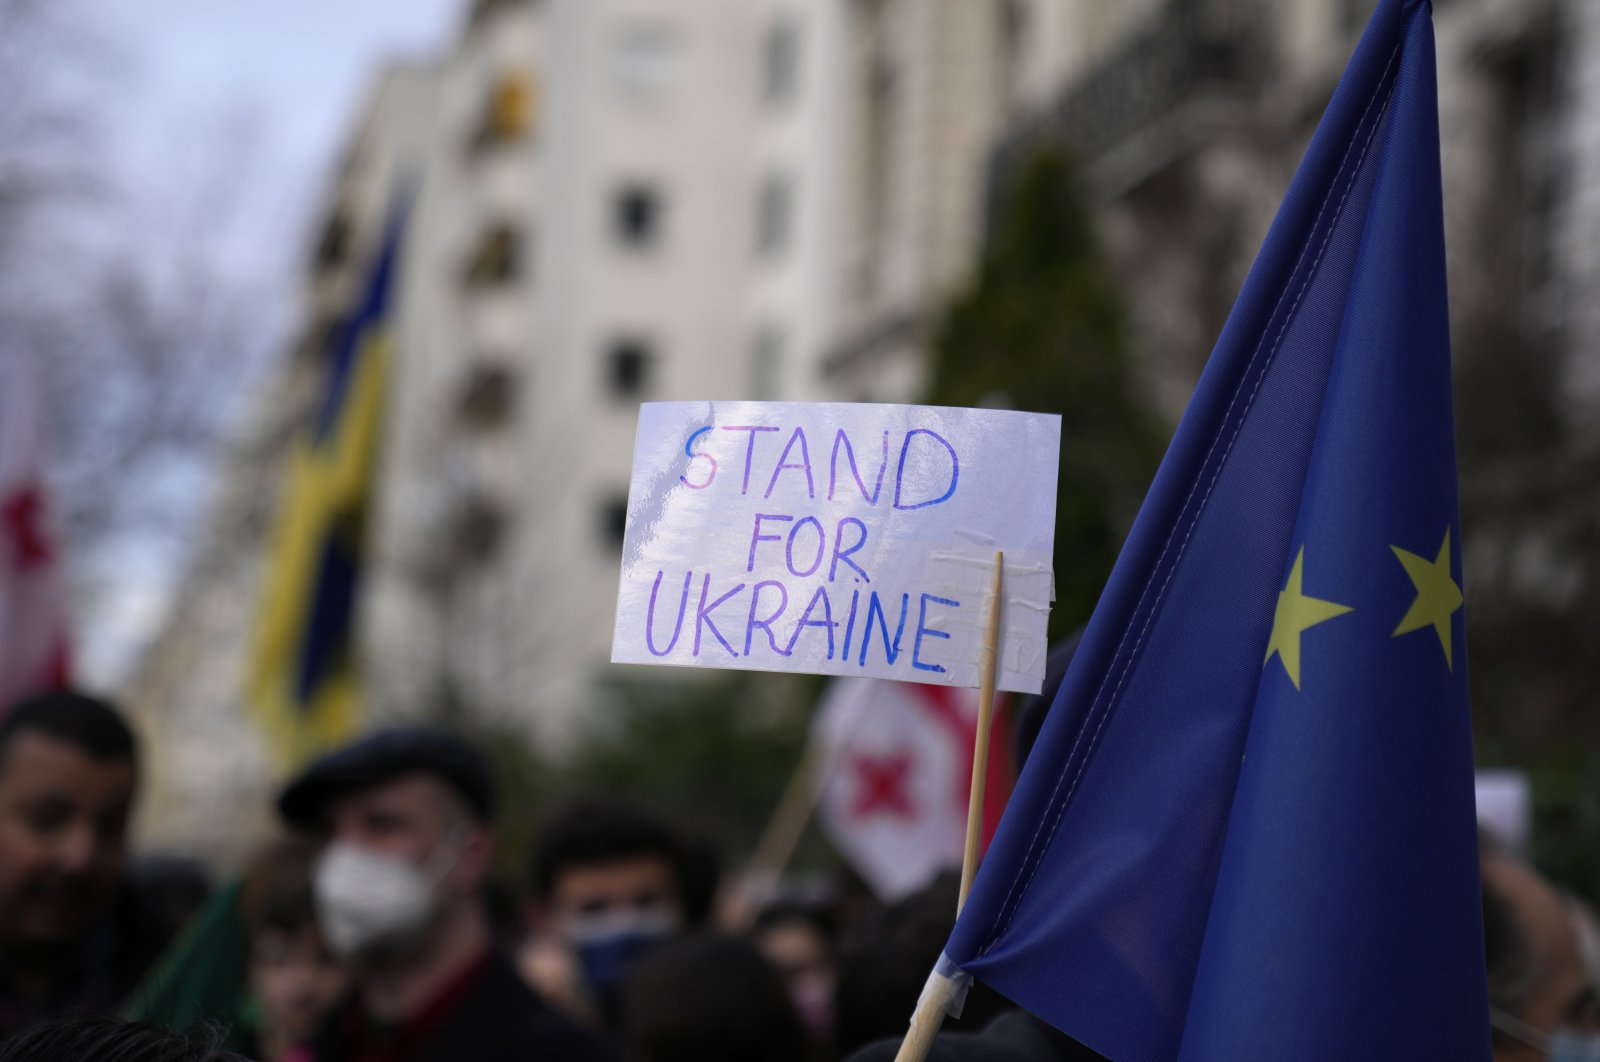 A protestor holds up a sign next to a European Union flag during a demonstration in front of the Russian Embassy in Paris, France, Feb. 22, 2022. (AP Photo)